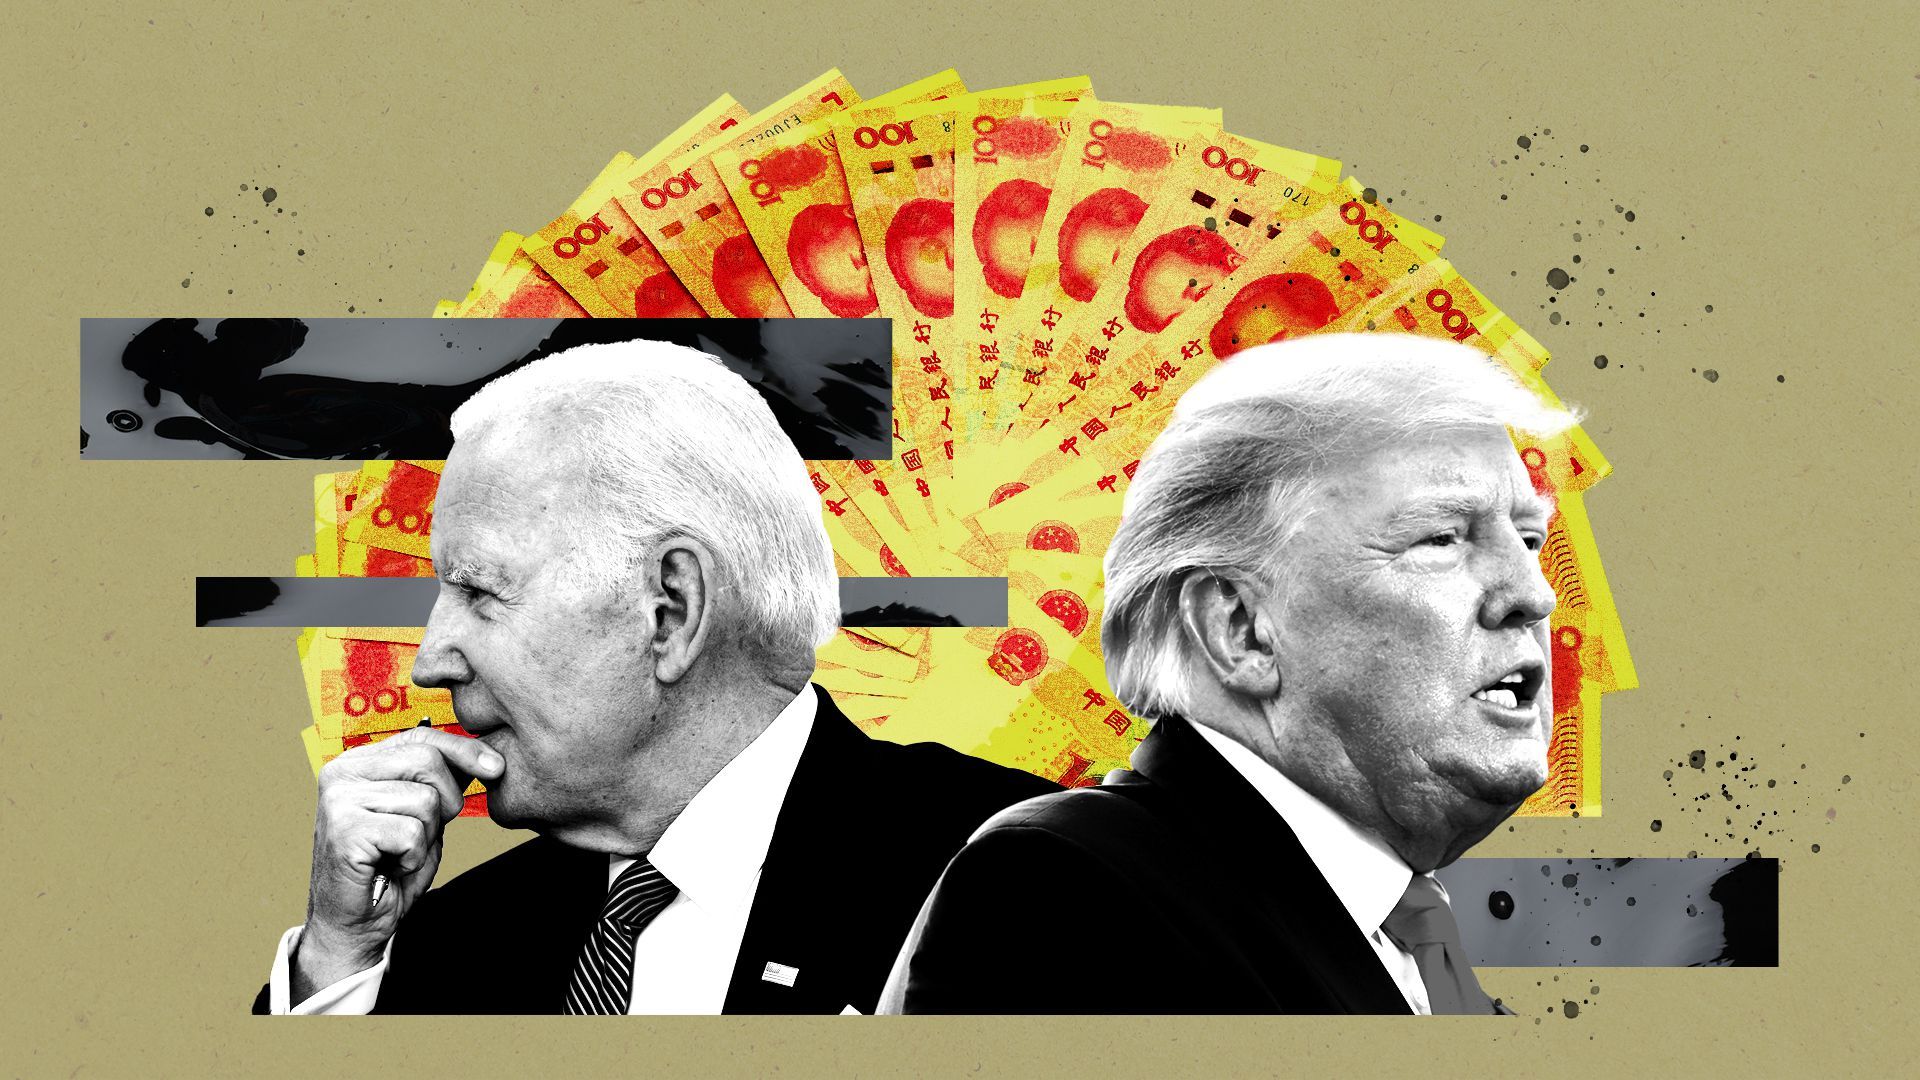 Photo illustration of President Biden, Donald Trump, Chinese currency, and oil textures.